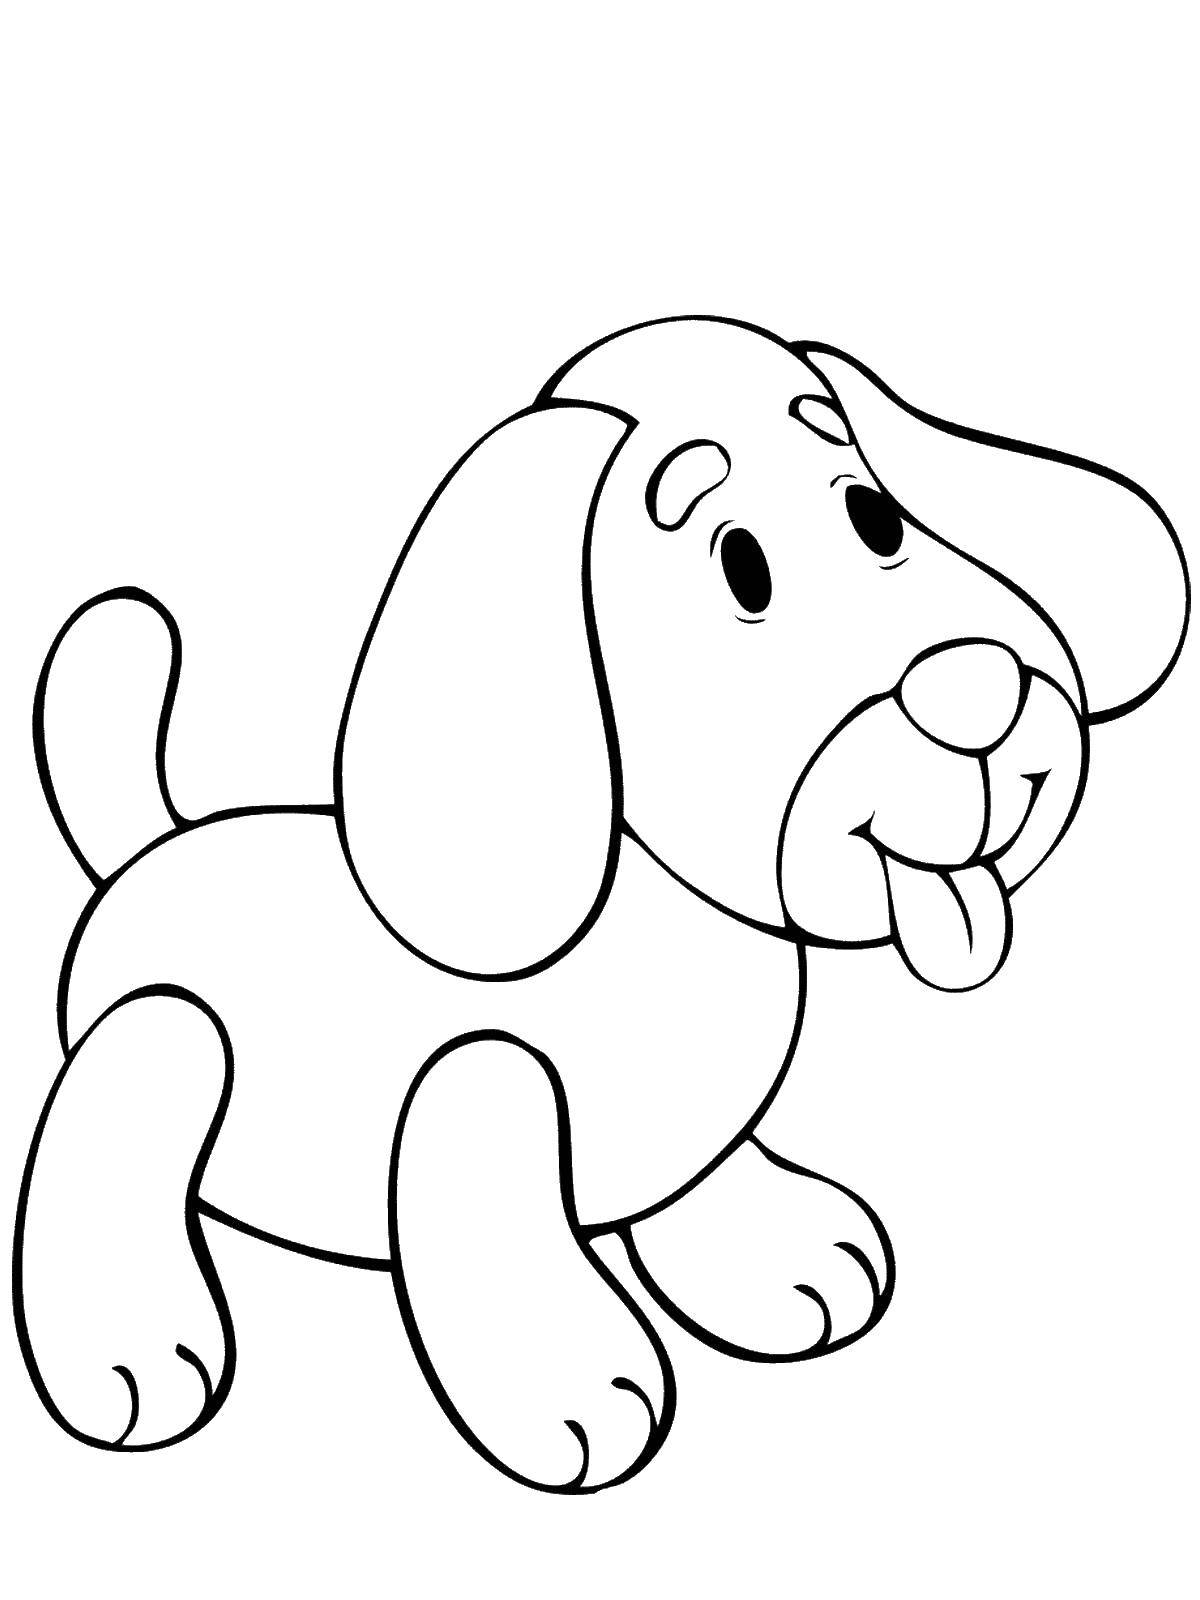 Coloring Toy dog. Category toys. Tags:  dog, tail, ears, tongue.